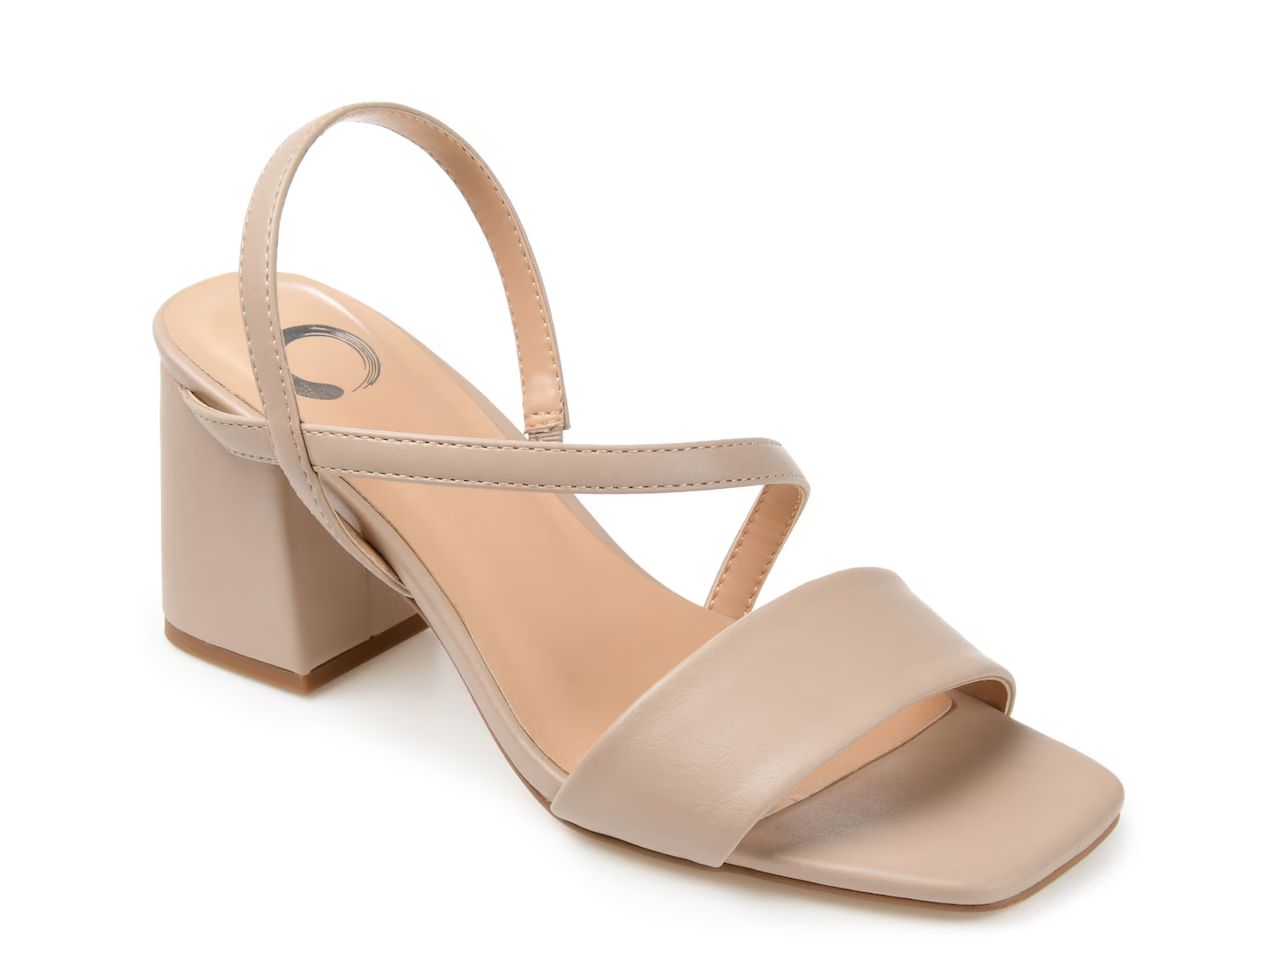 Journee Collection Lirryc 2 Sandal | DSW